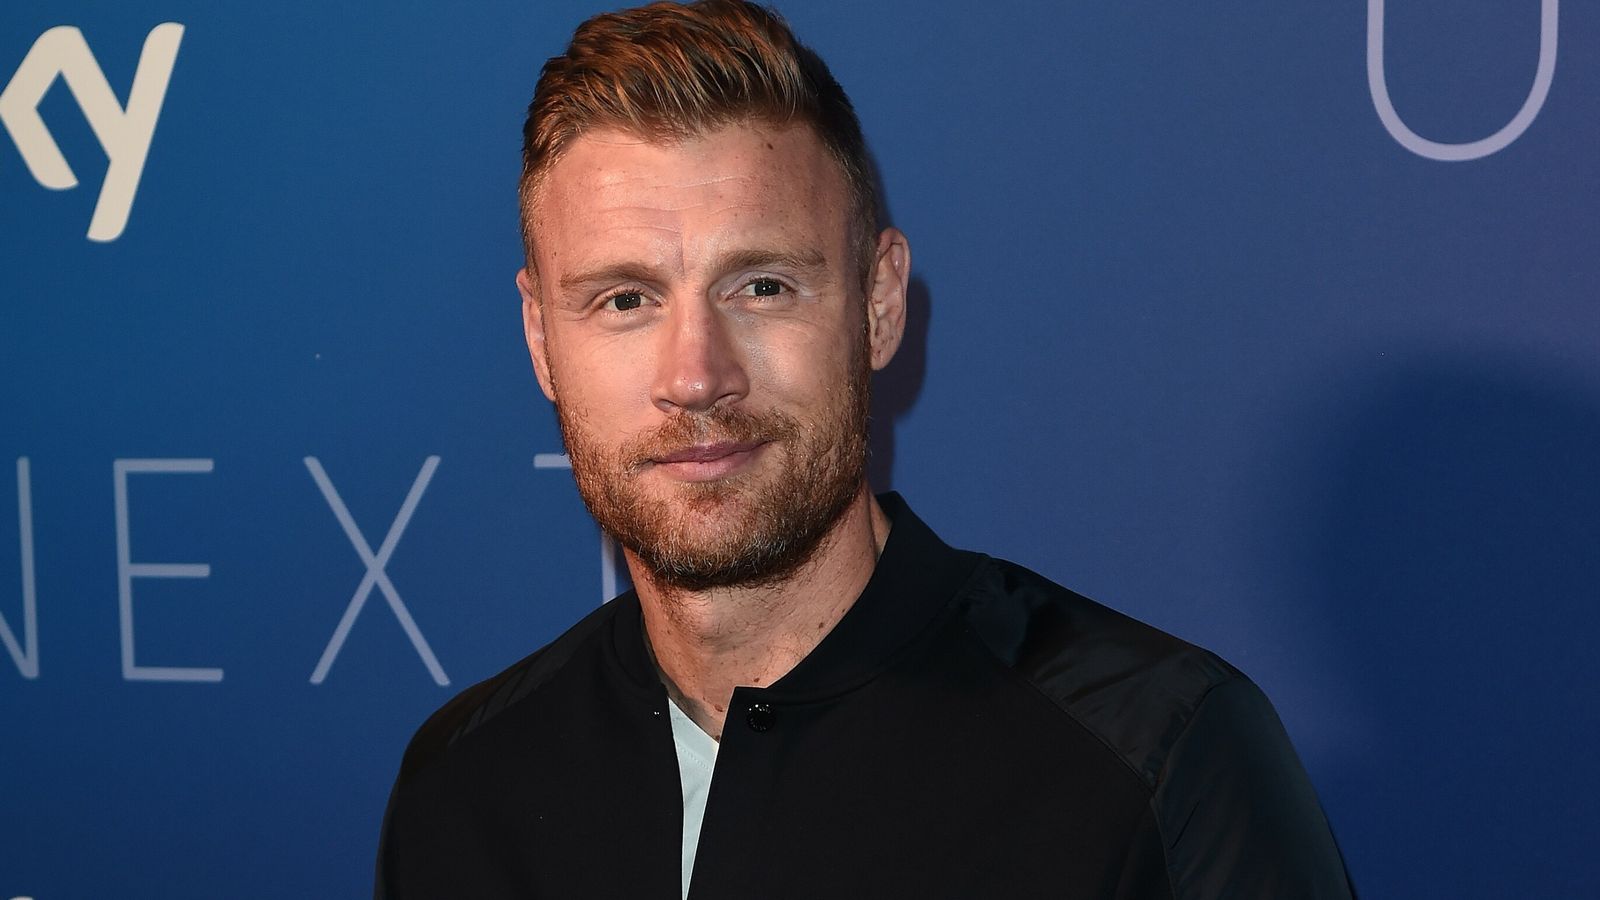 BBC axes latest Top Gear series and apologises to Andrew Flintoff after crash investigation